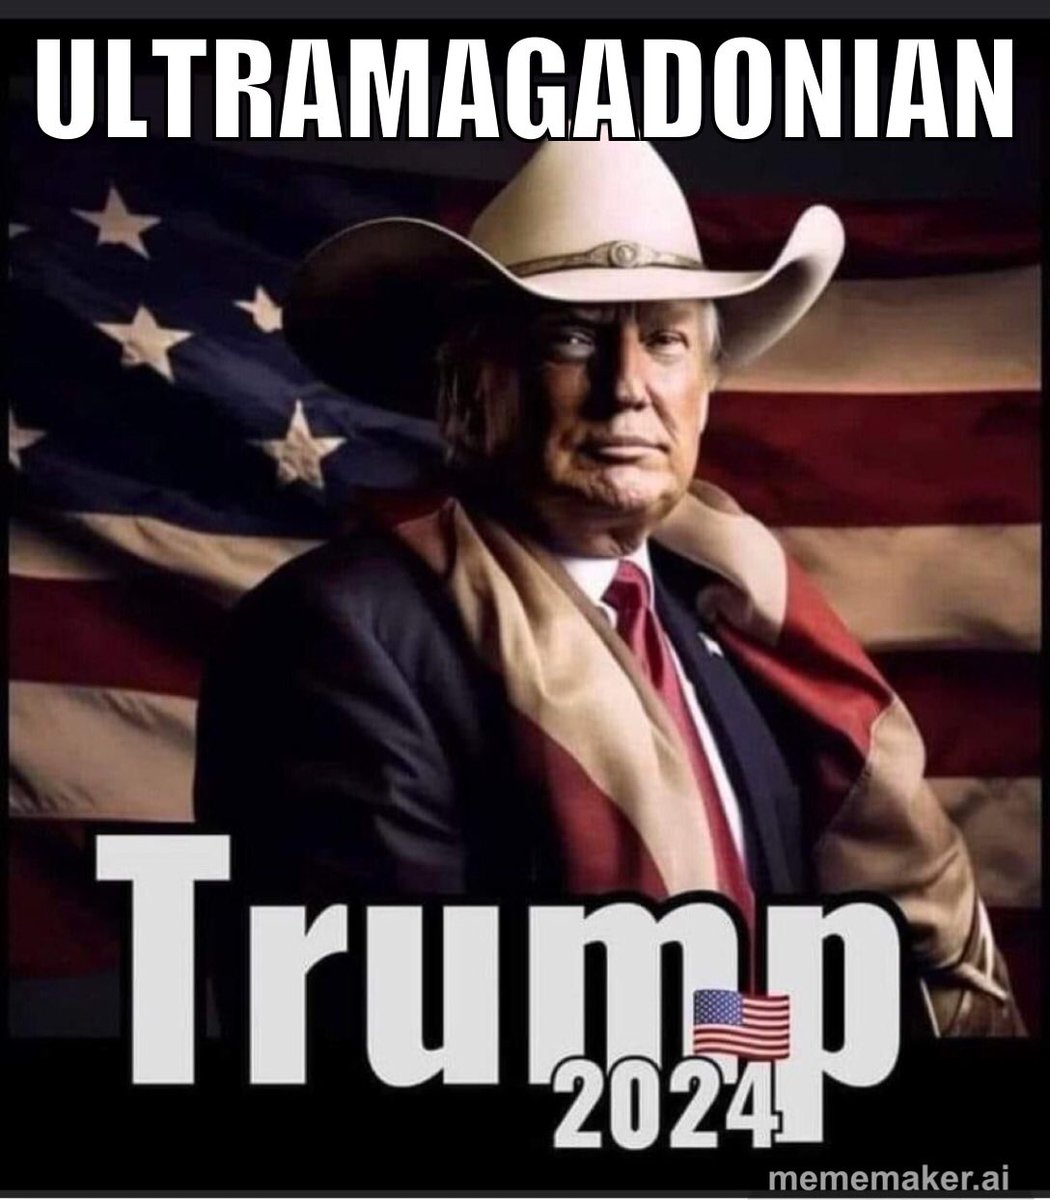 @Pgh_Buz @bdonesem @8_27J @PaulMer53 @Bree1914 @cali_beachangel @Catahoulas_rule @Chicago1Ray @DMcDMuffin @PAYthe_PIPER @f_a_r_a_h_9 @goin_nice @goldisez @JDugudichi @keith0sta @mil_vet17 @mollie_don @rreeves5 @TJLakers01 @x4Eileen Thank you brother. Much appreciated. Sorry i'm late
Please be sure you are following @Pgh_Buz 👈💯